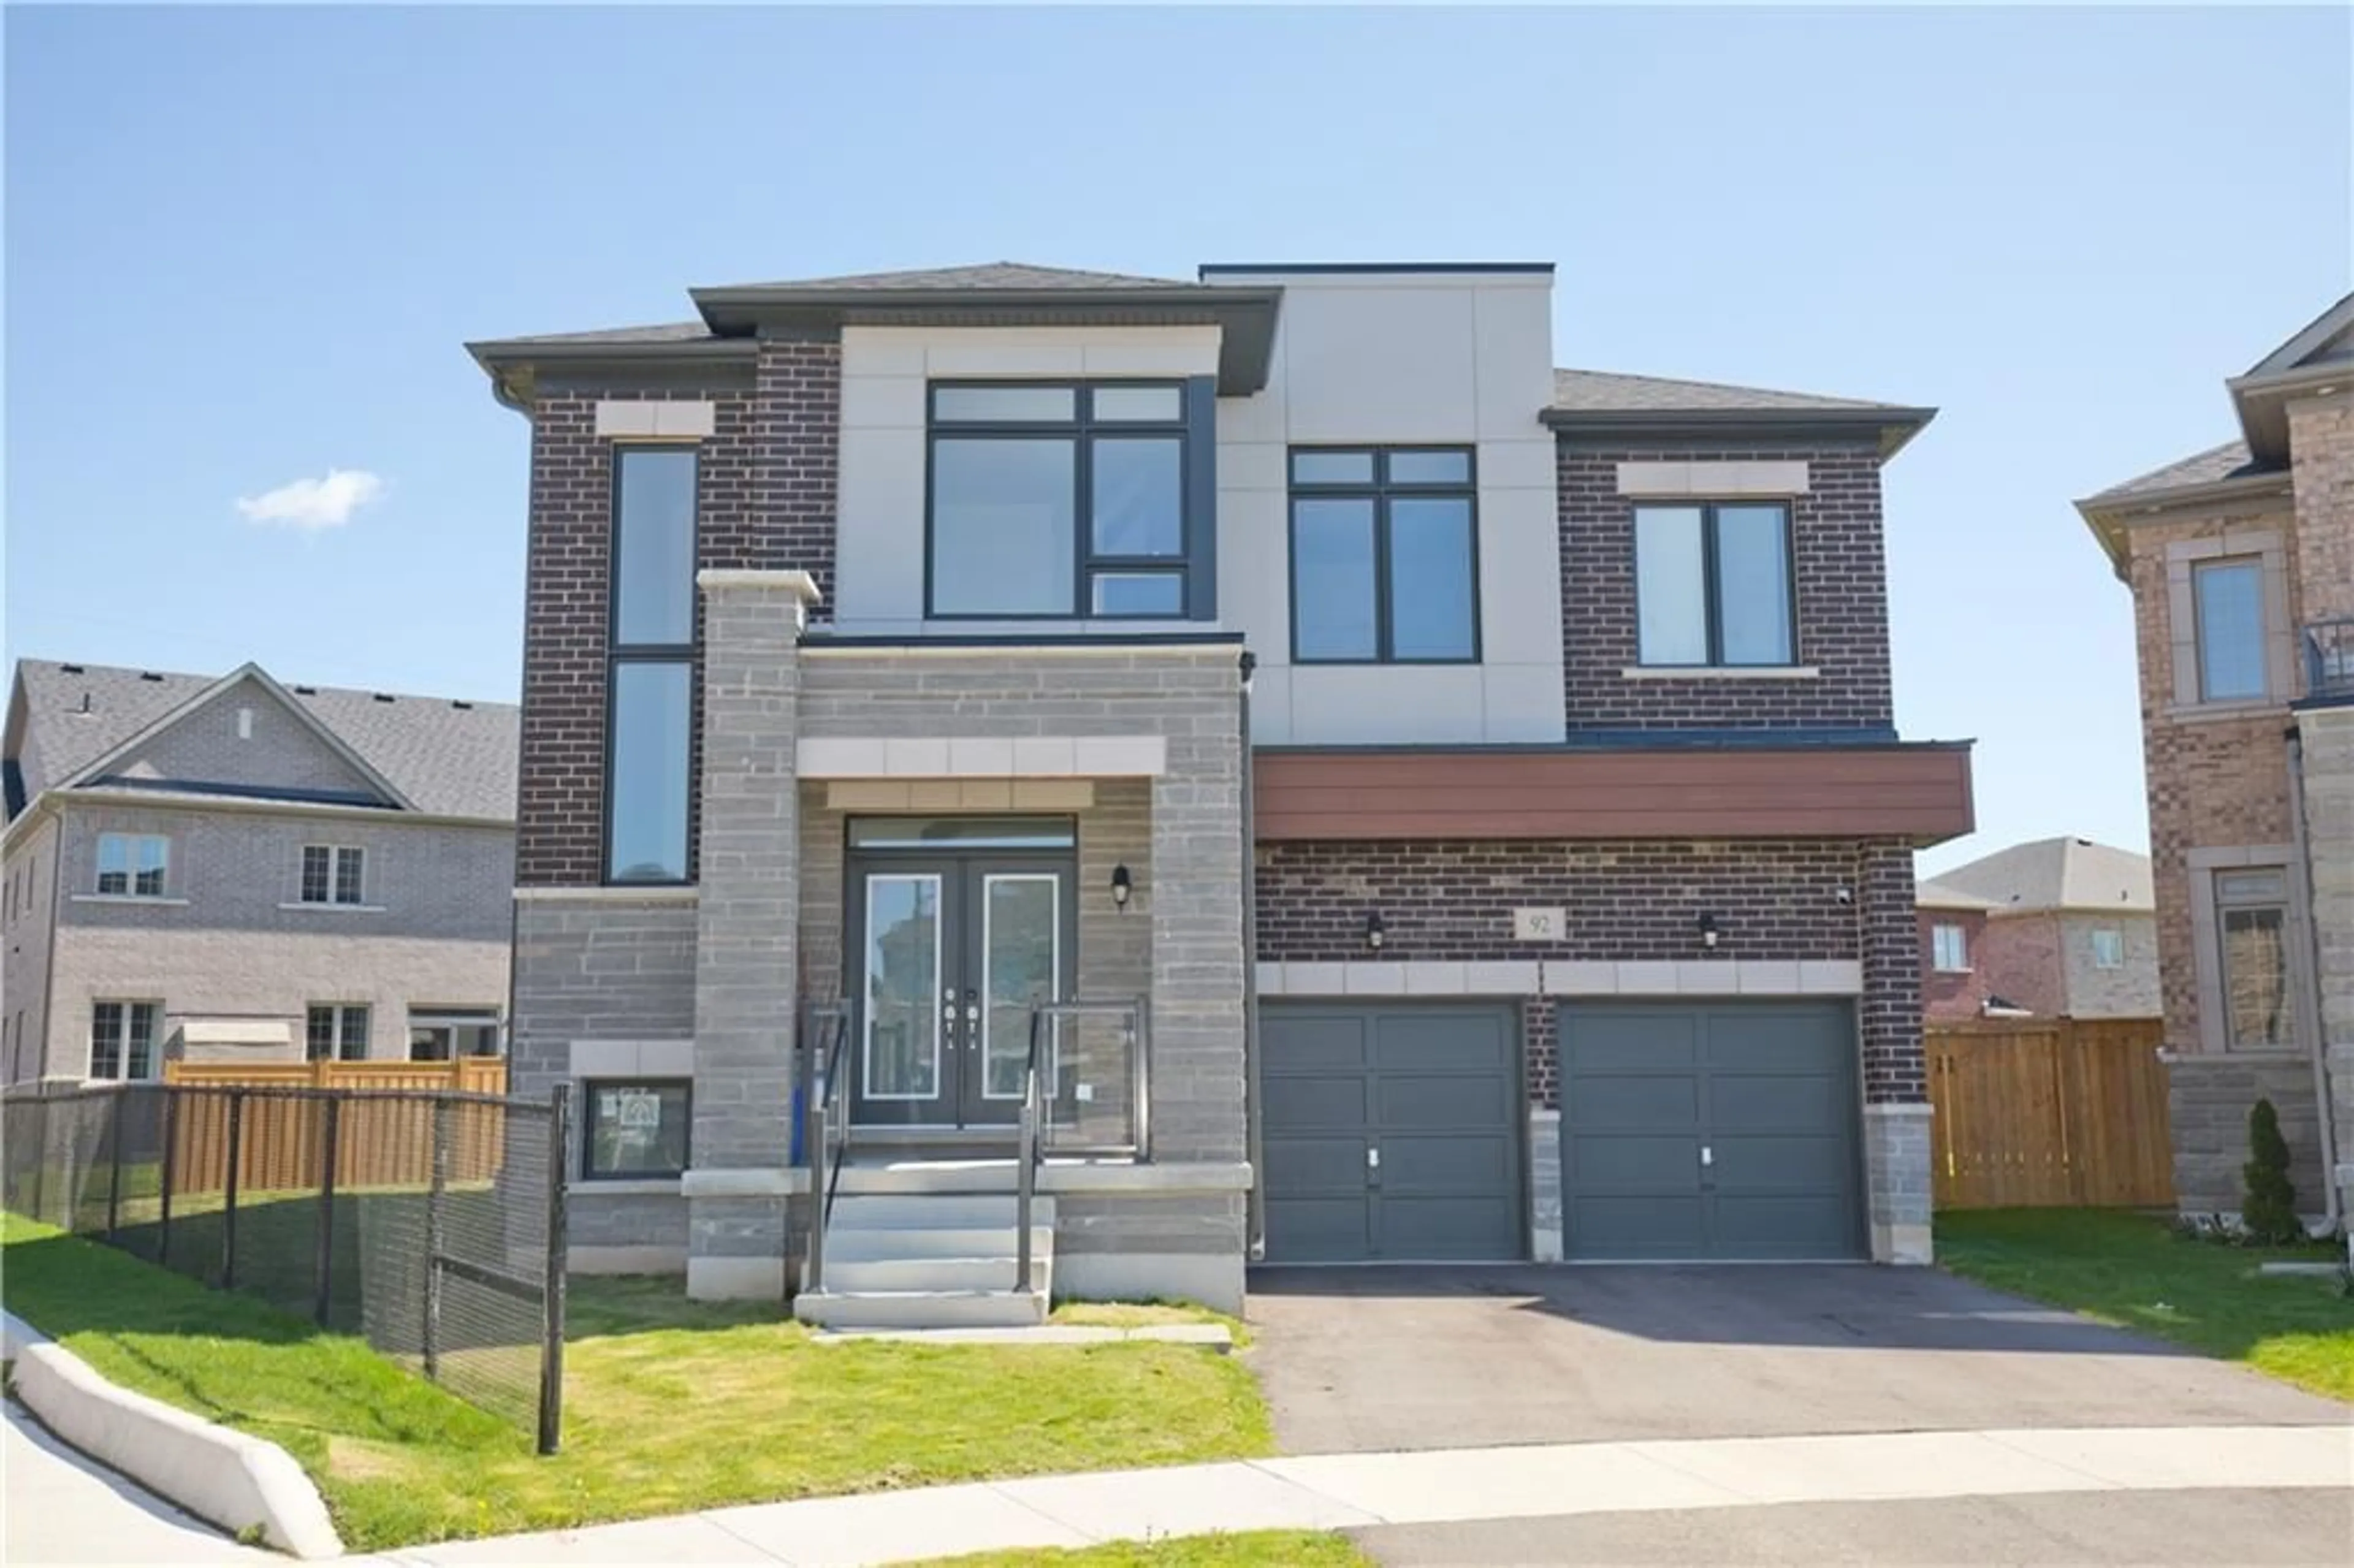 Home with brick exterior material for 92 ELSTONE Place, Waterdown Ontario L8B 1Y9